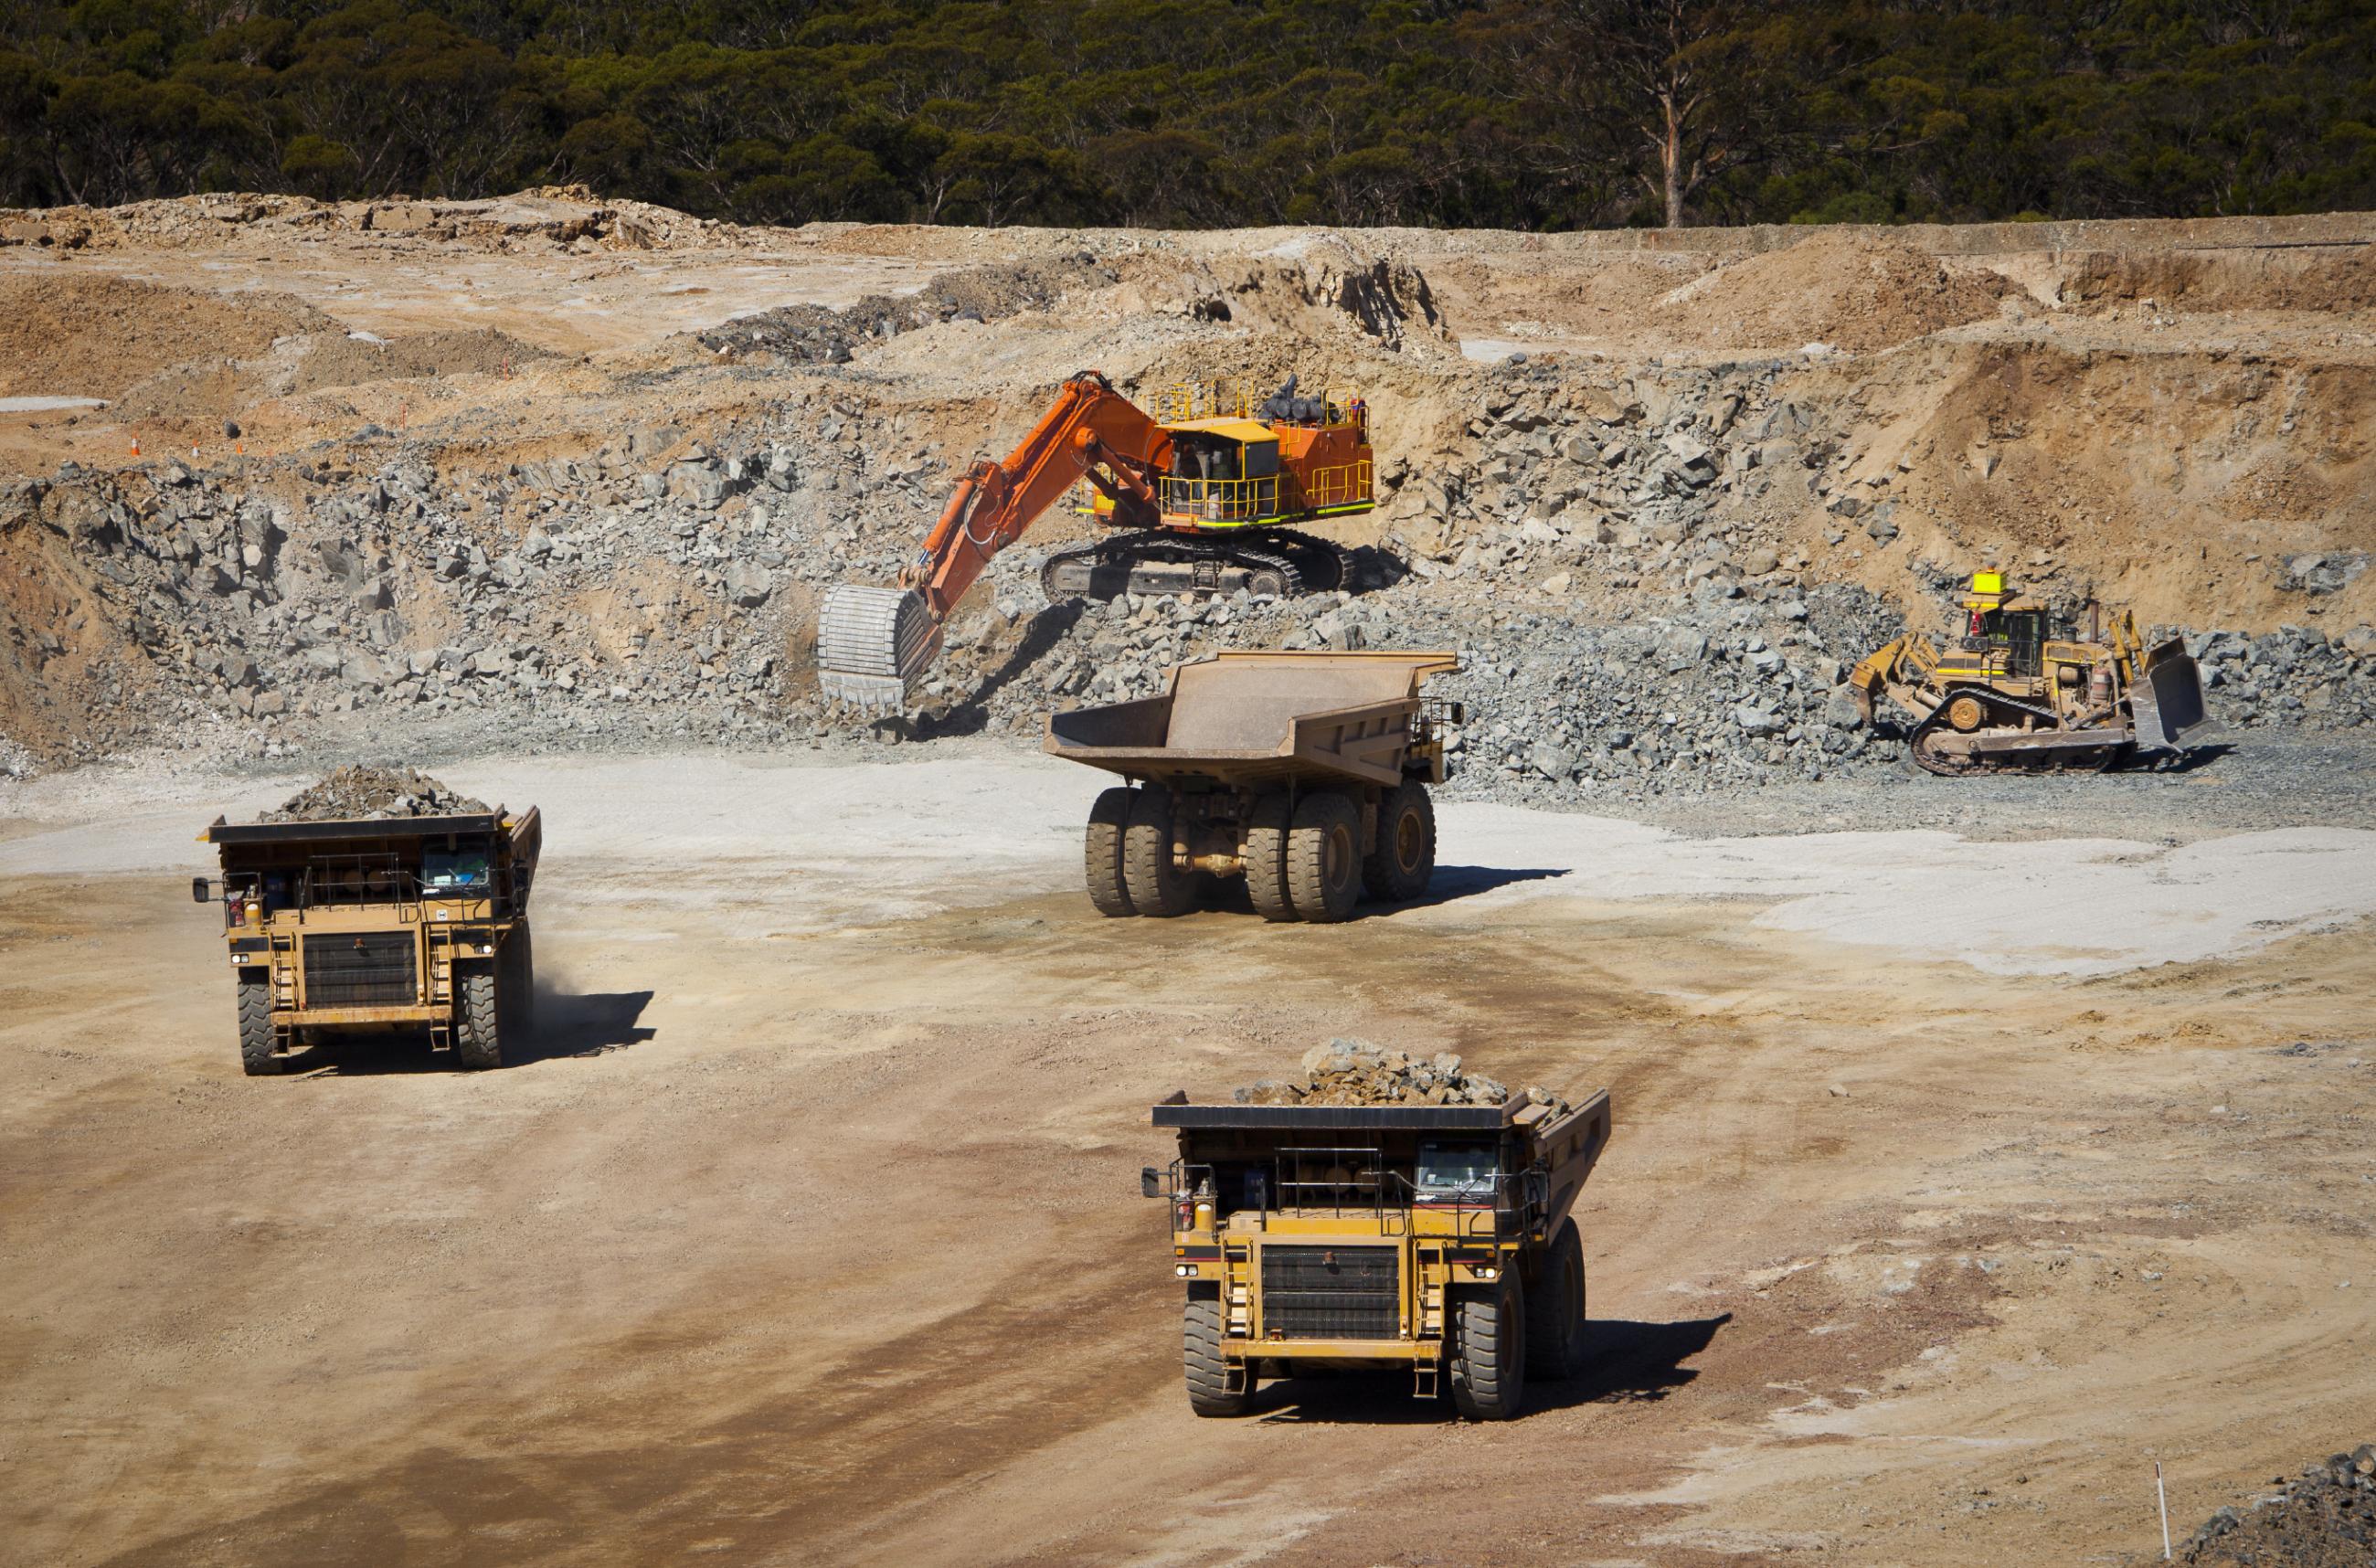 Construction vehicles in a mining site